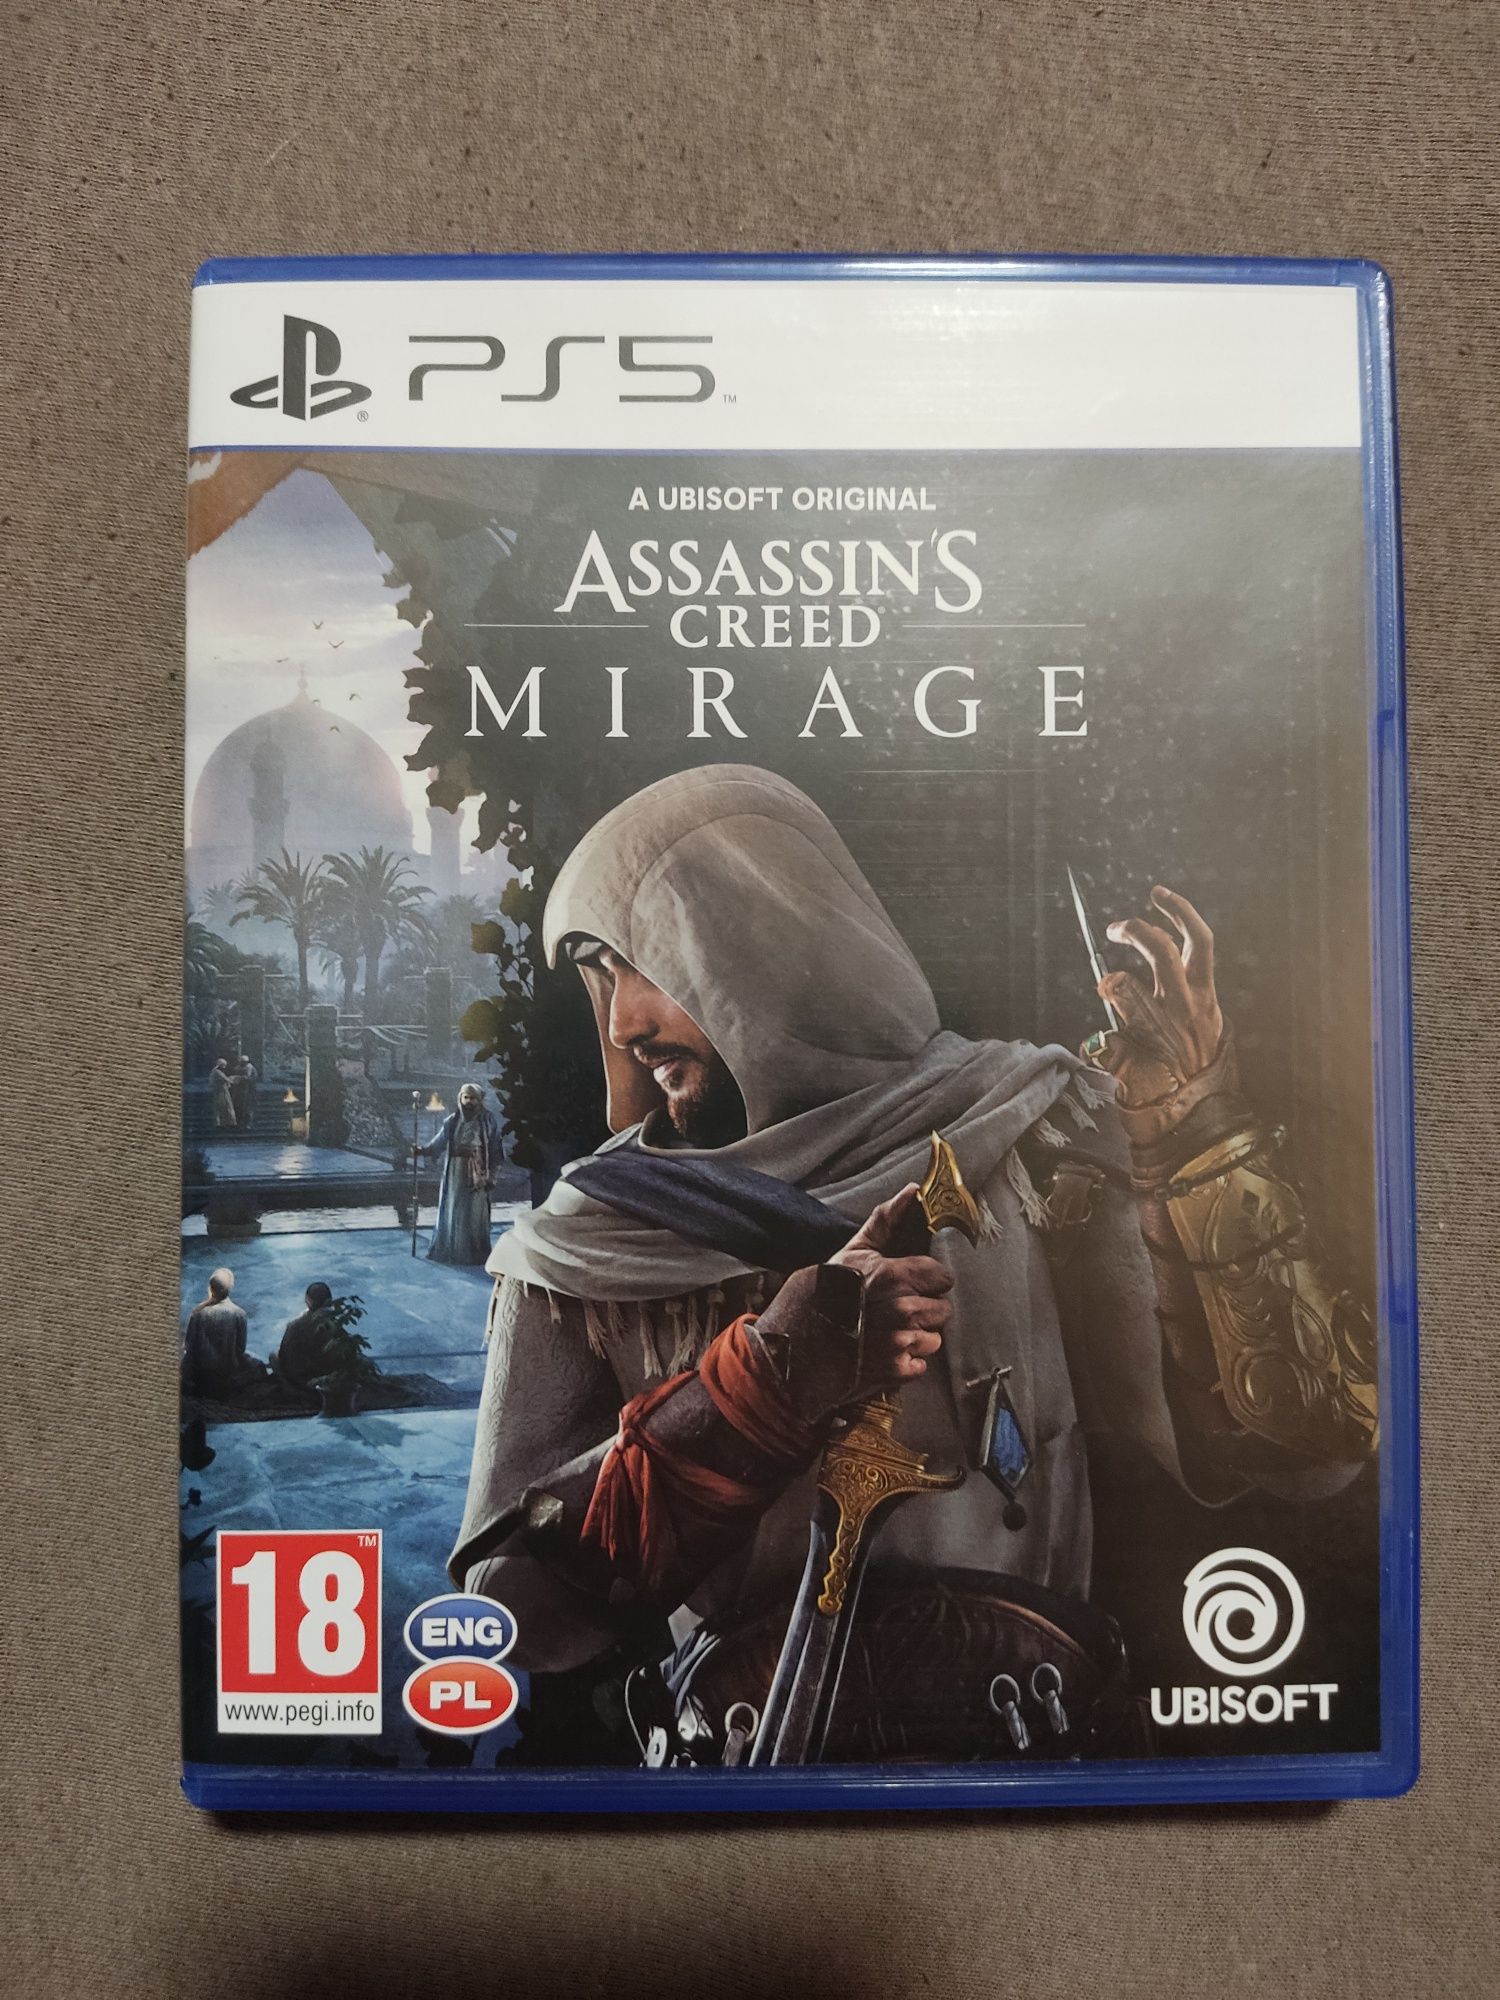 Assassin's creed Mirage - Launch Edition gra PS5